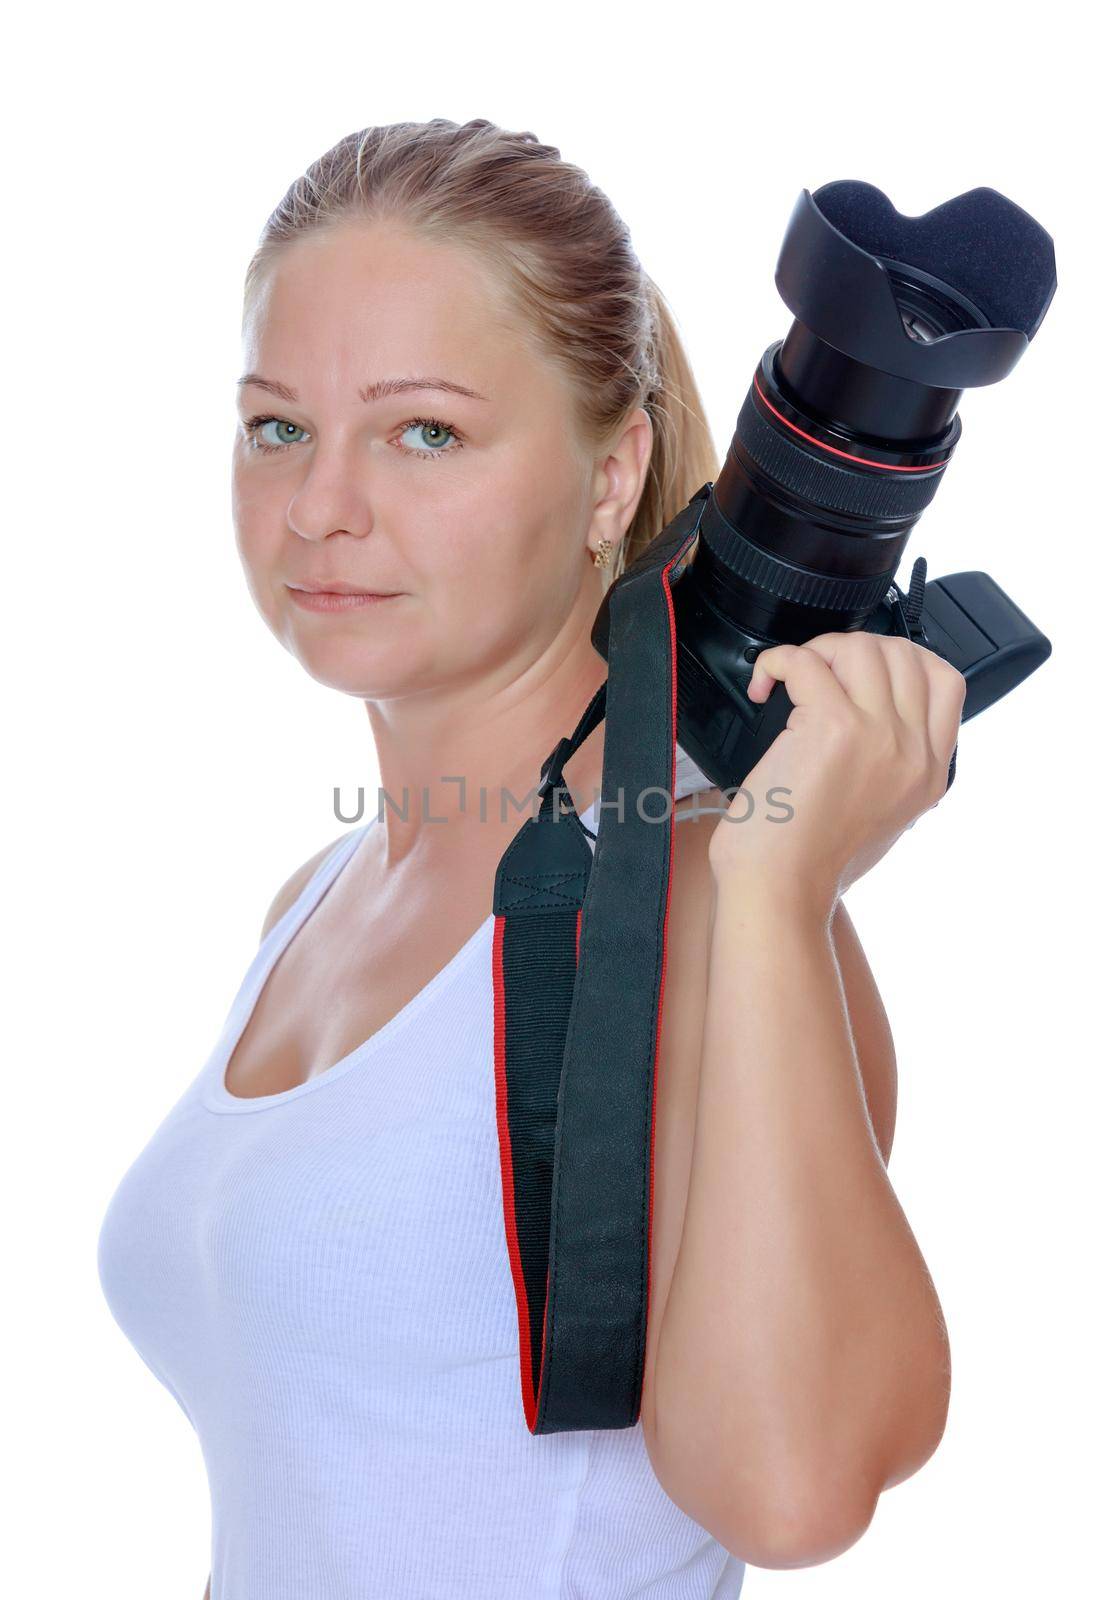 Cute young girl in white shirt drawing,with a professional camera.Girl holding a camera in one hand.Isolated on white background